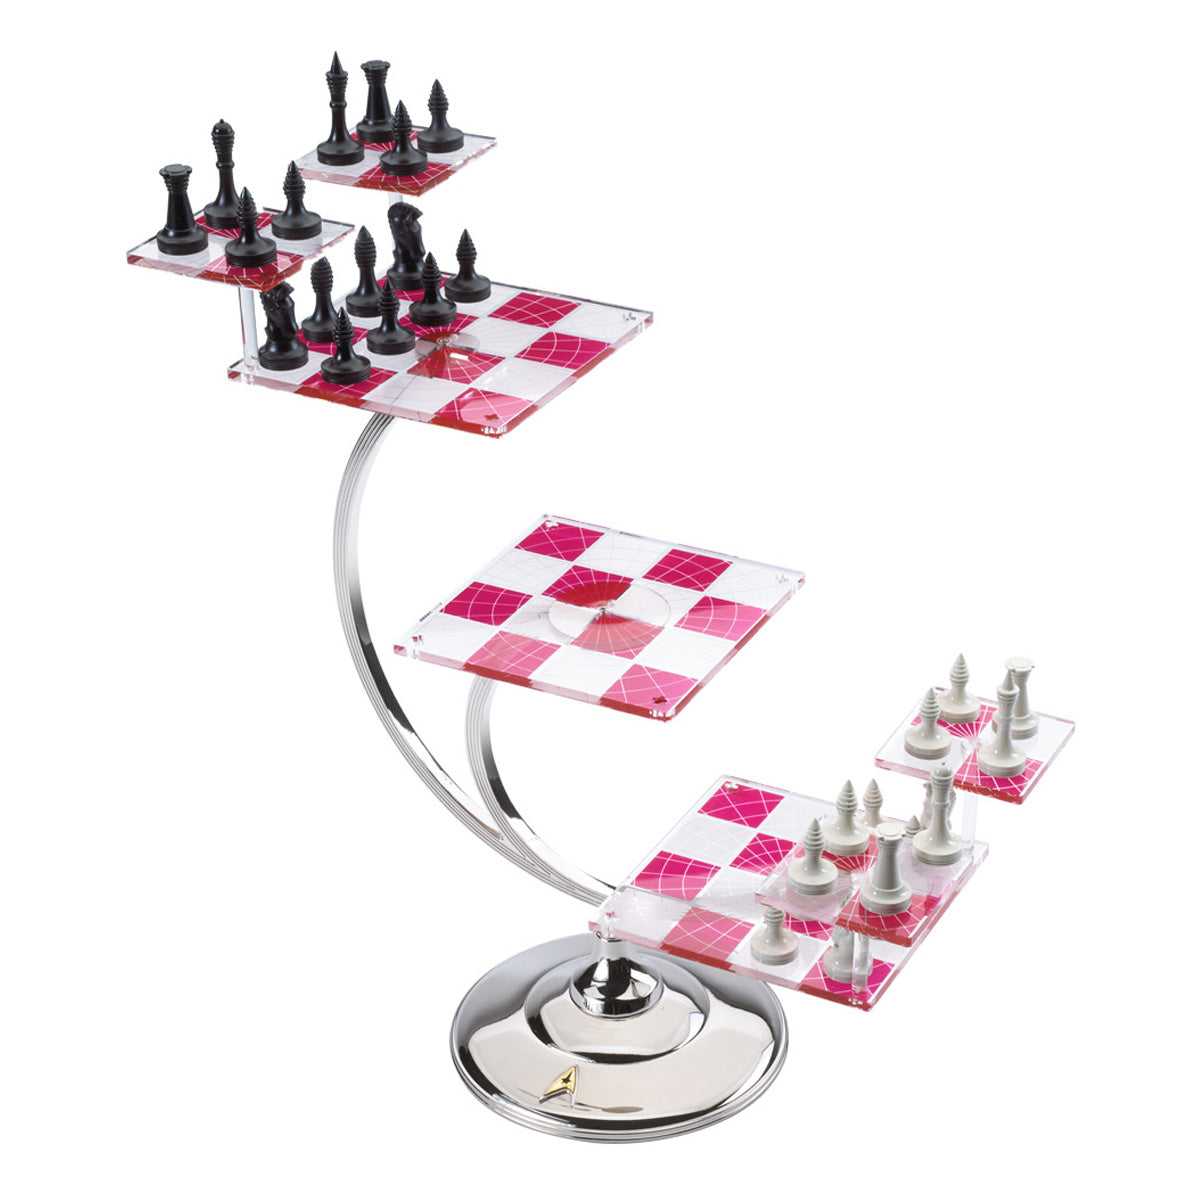 NOBLE COLLECTIONS STAR TREK TRI-DIMENSIONAL CHESS SET NOBLE COLLECTIONS